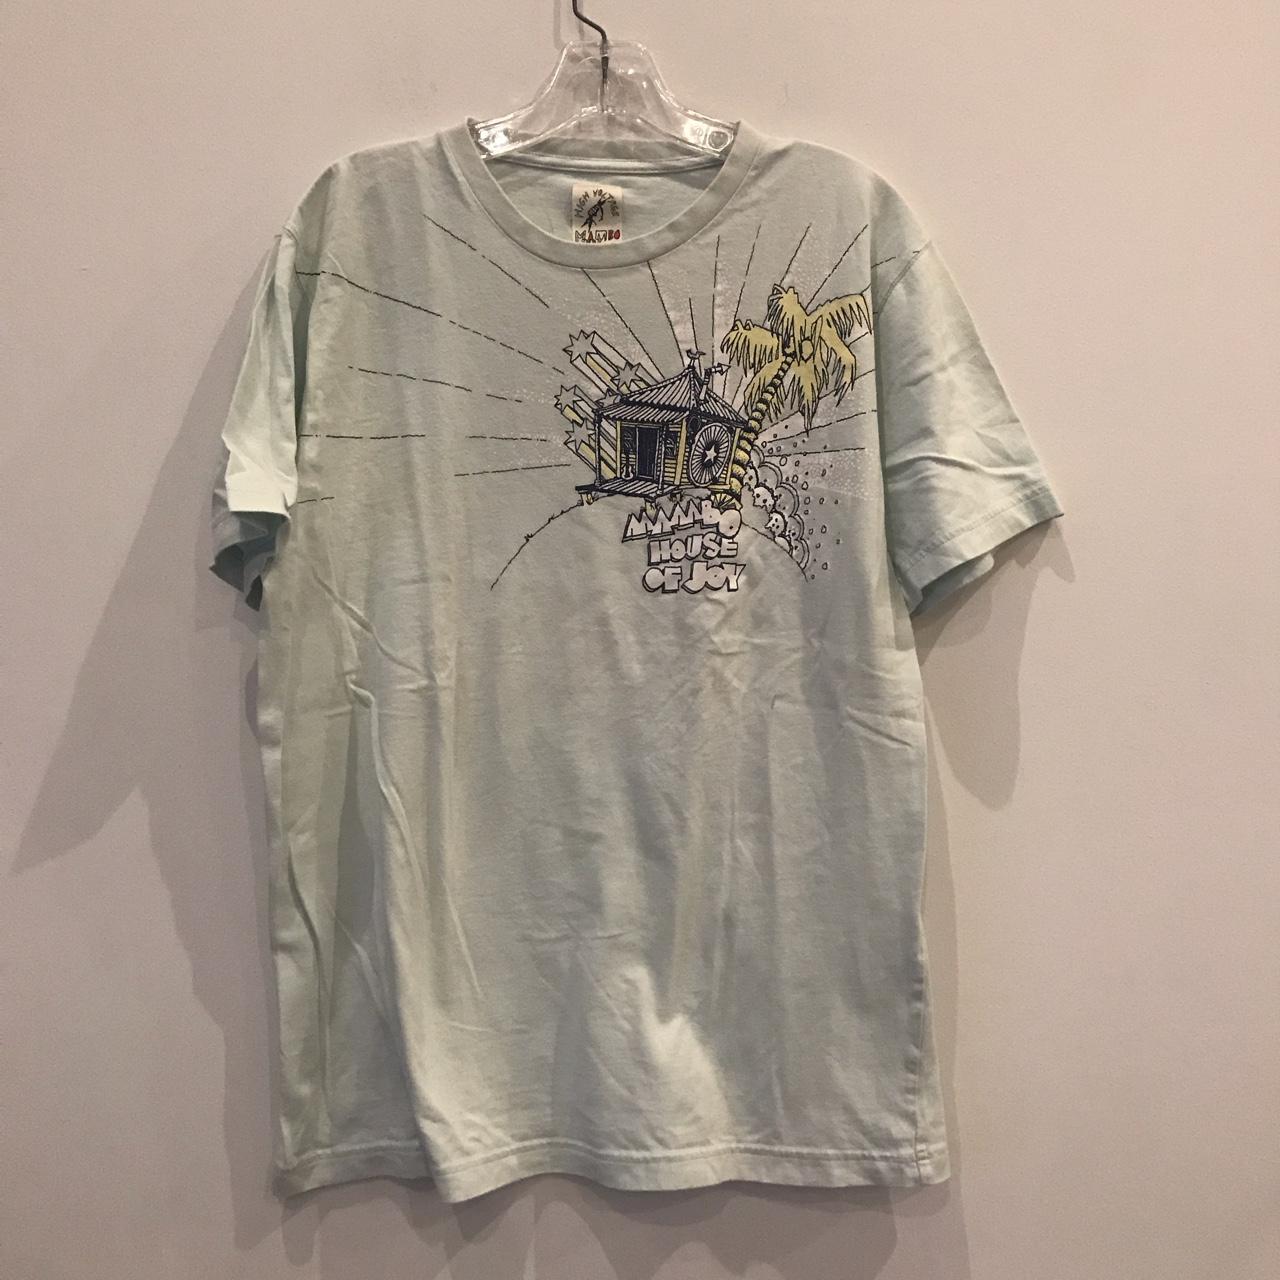 Product Image 2 - GRAPHIC TEE

-great condition, barely worn
-has